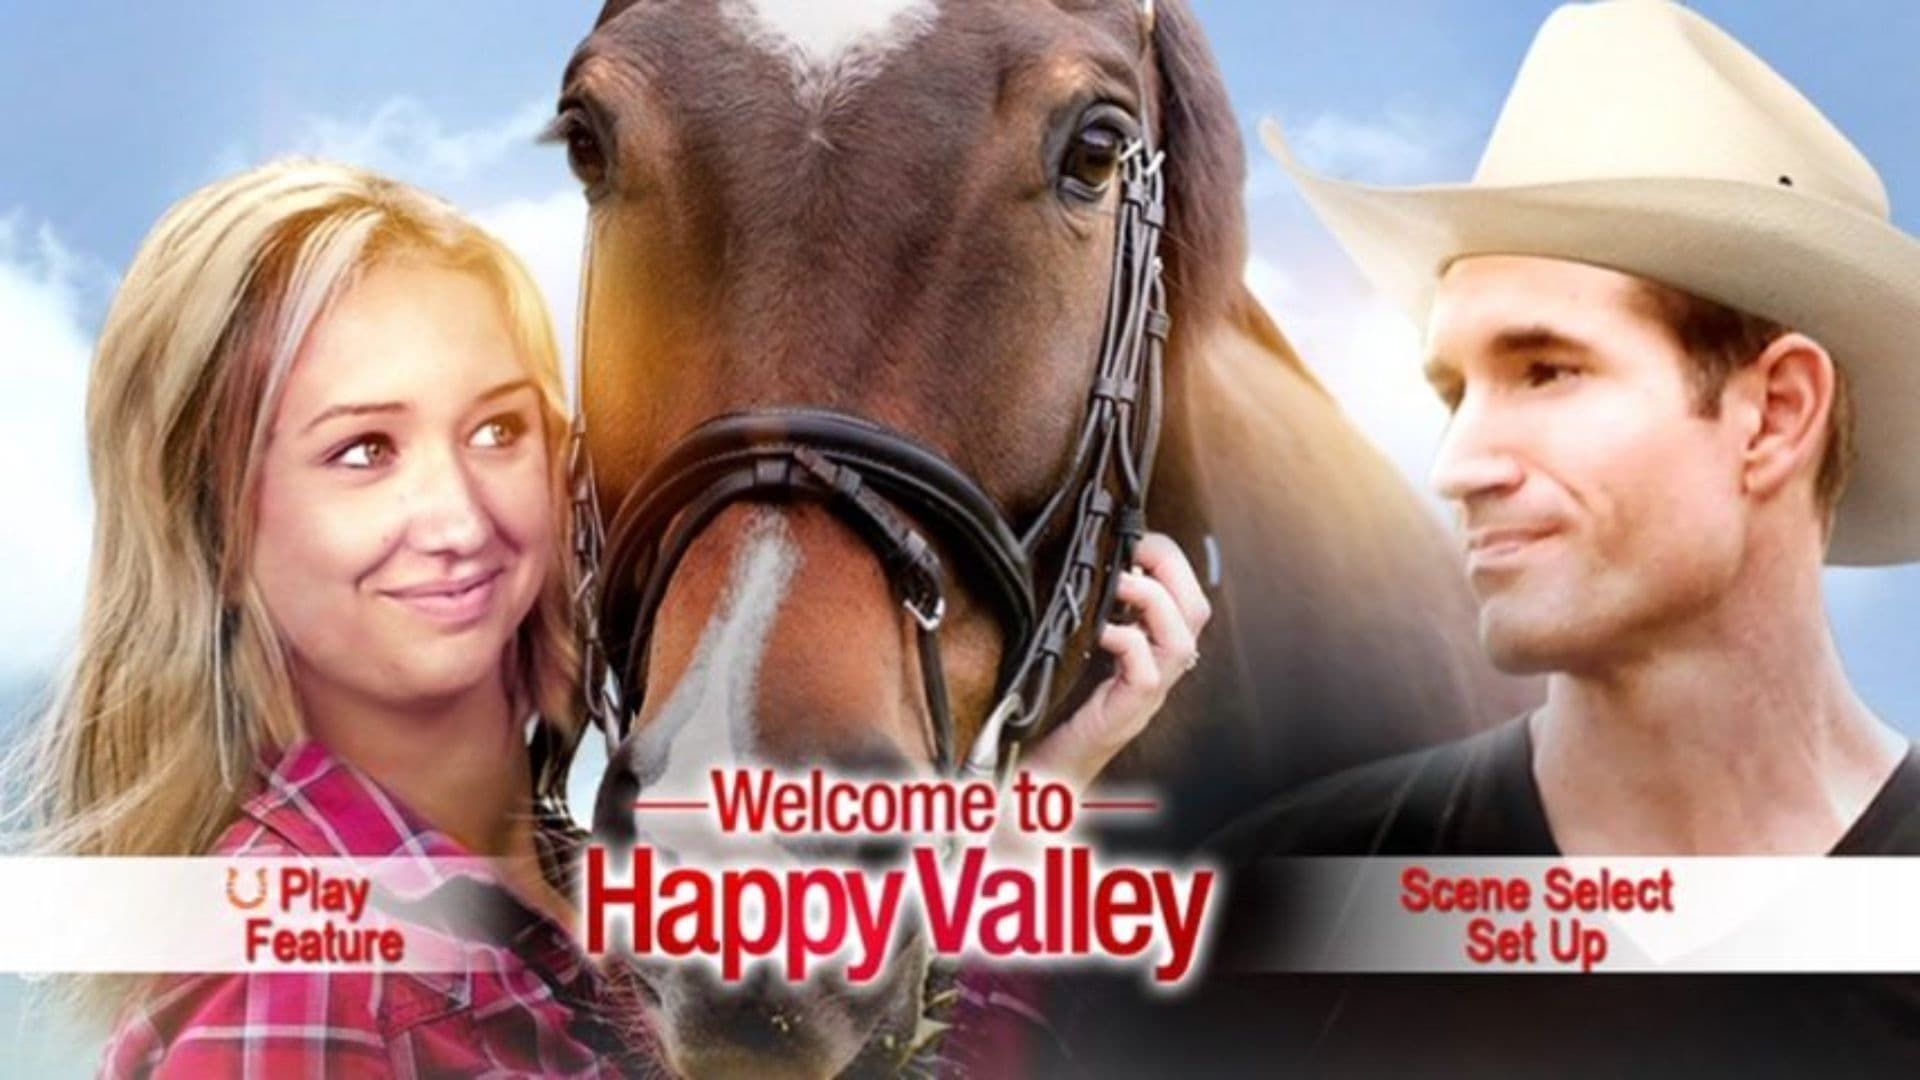 Welcome to Happy Valley background